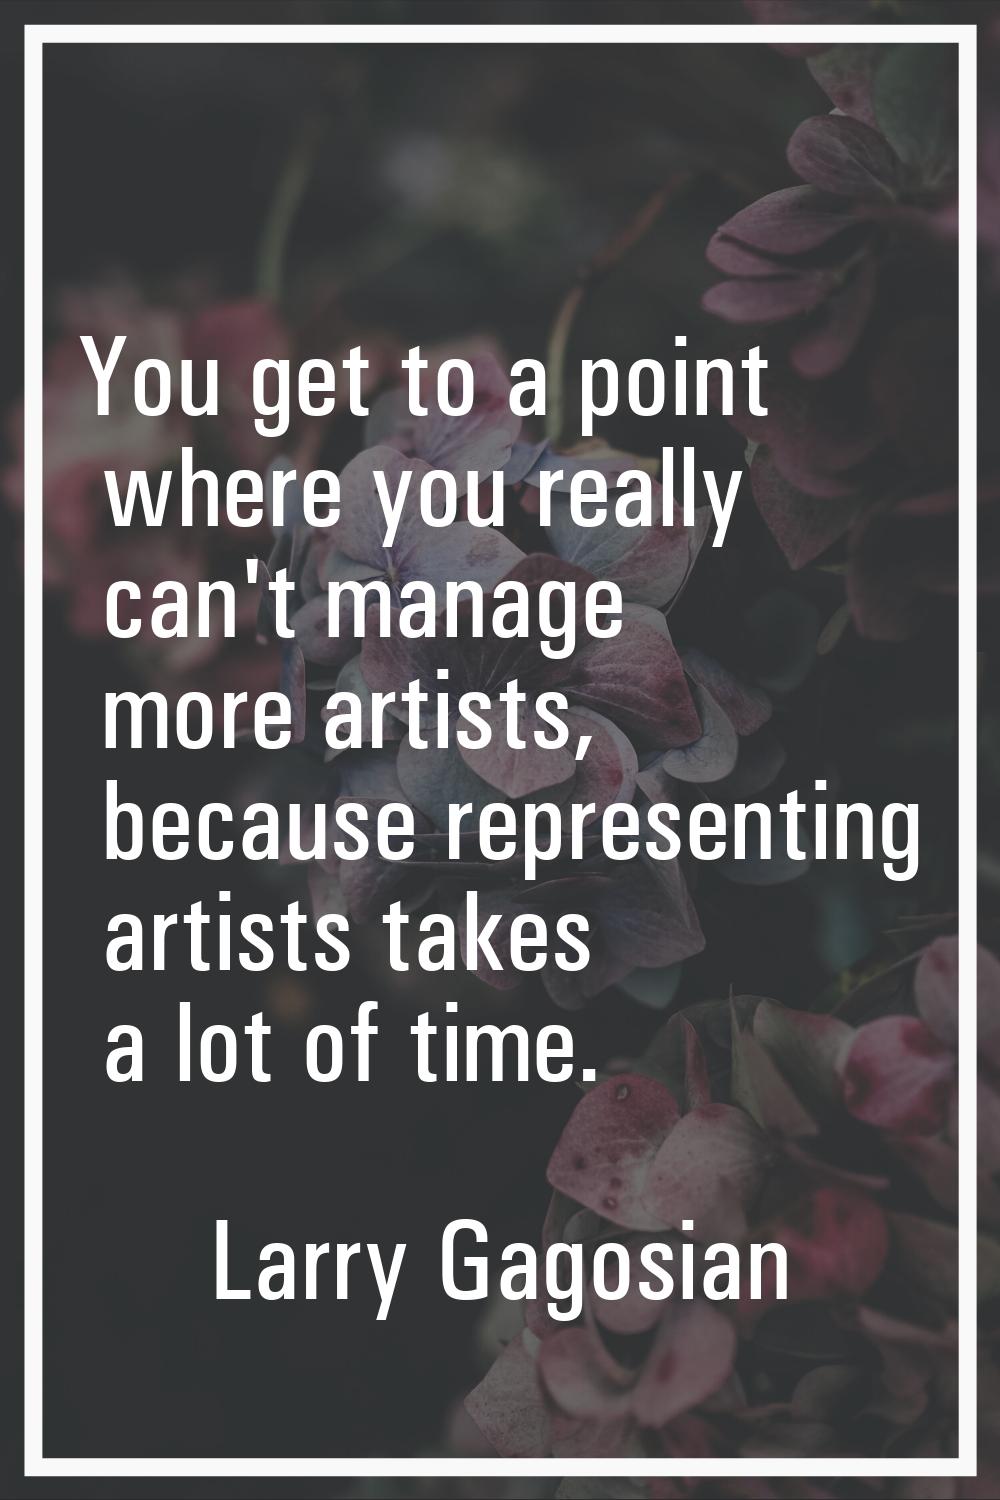 You get to a point where you really can't manage more artists, because representing artists takes a